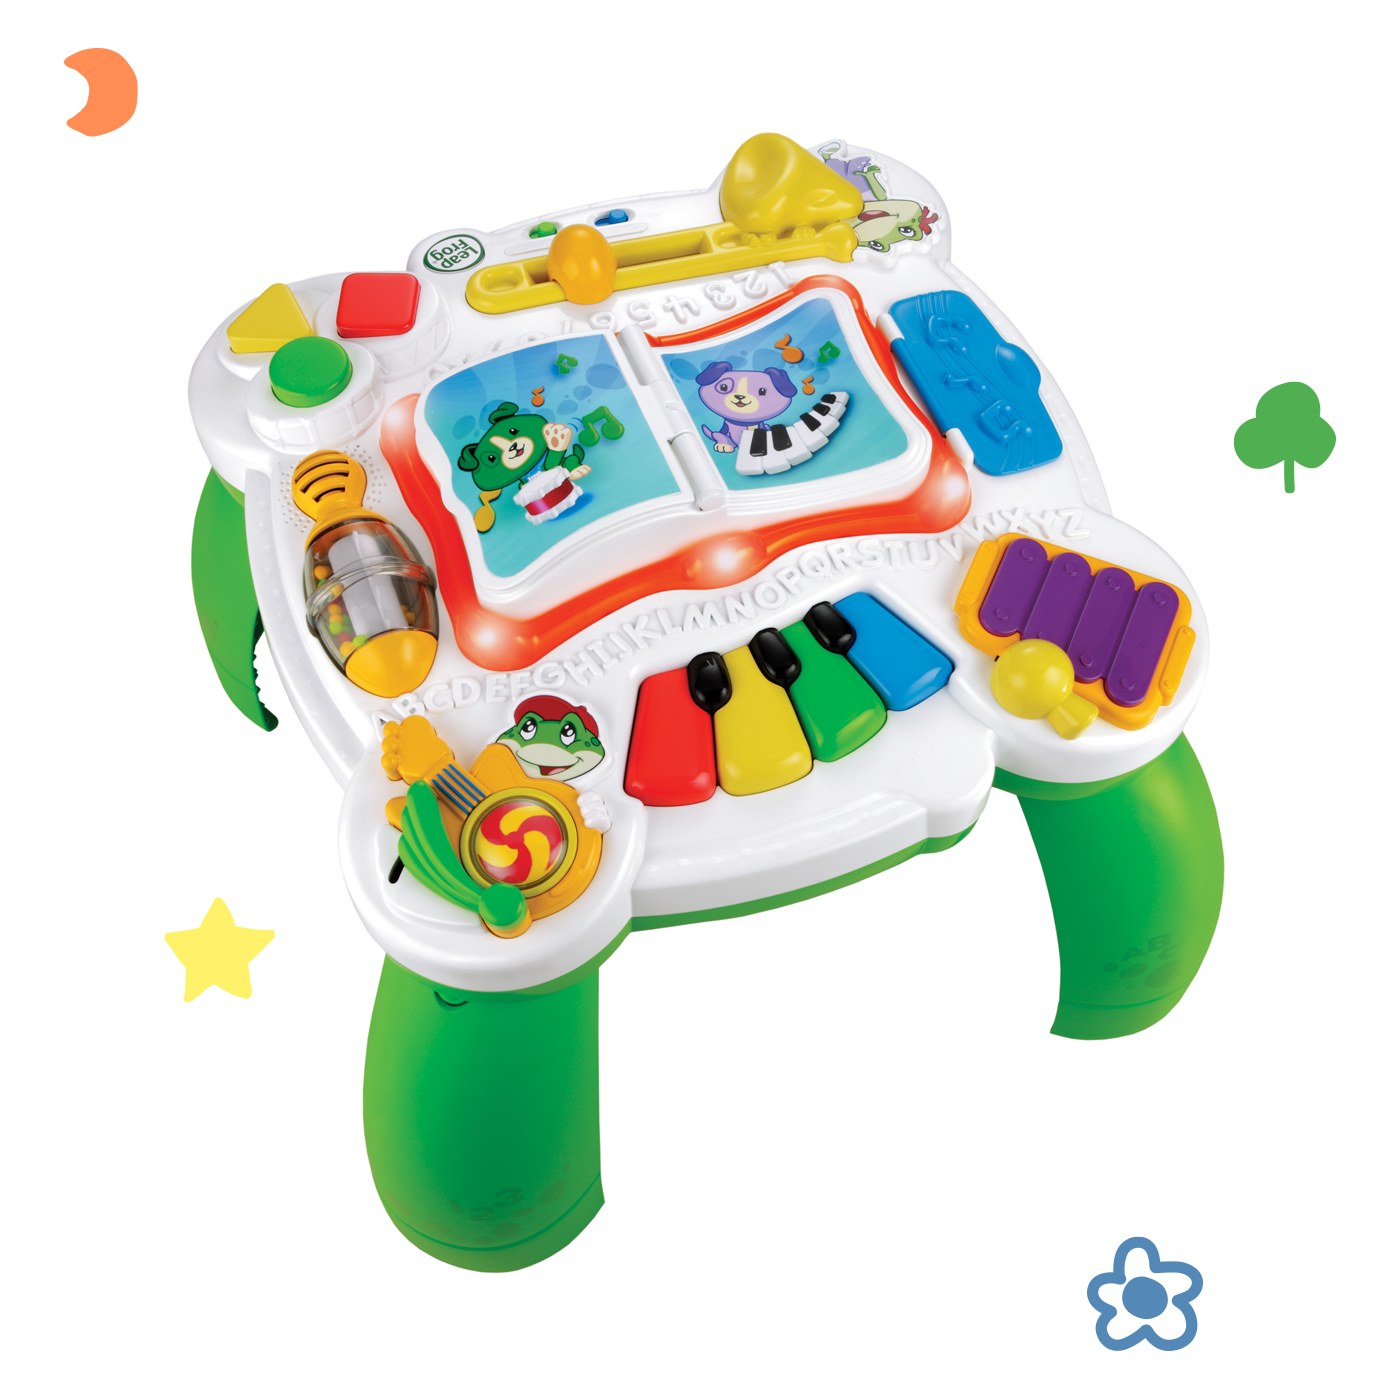 Leapfrog Learn & Groove Table, toy box club, table piano, childrens toy